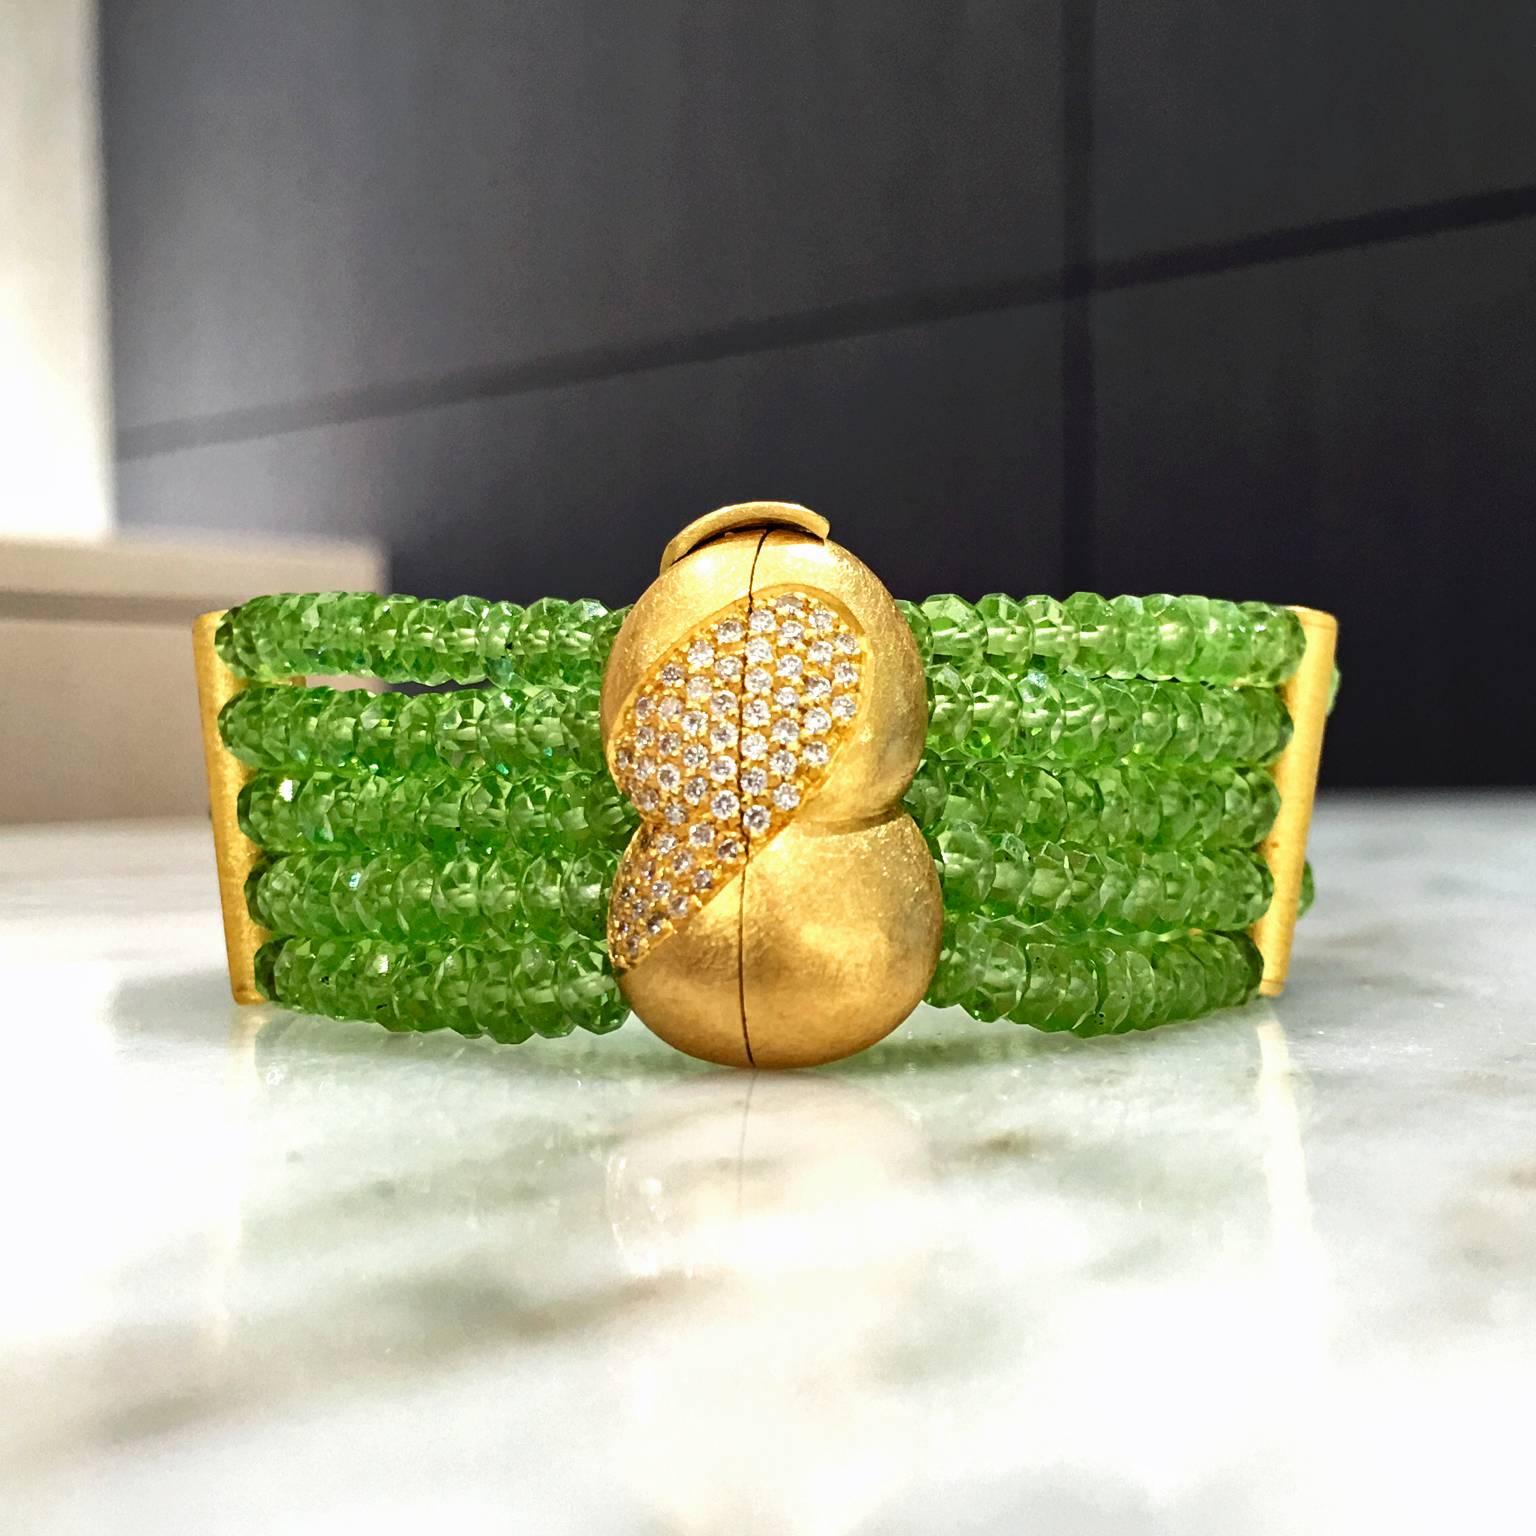 One-of-a-Kind Faceted Peridot Five Strand Bracelet handcrafted by German jewelry artist Eva Steinberg in matte-finished 21k yellow gold with 62 internally flawless, round brilliant-cut white diamonds totaling 0.50 carats, bezel-set in a 21k yellow